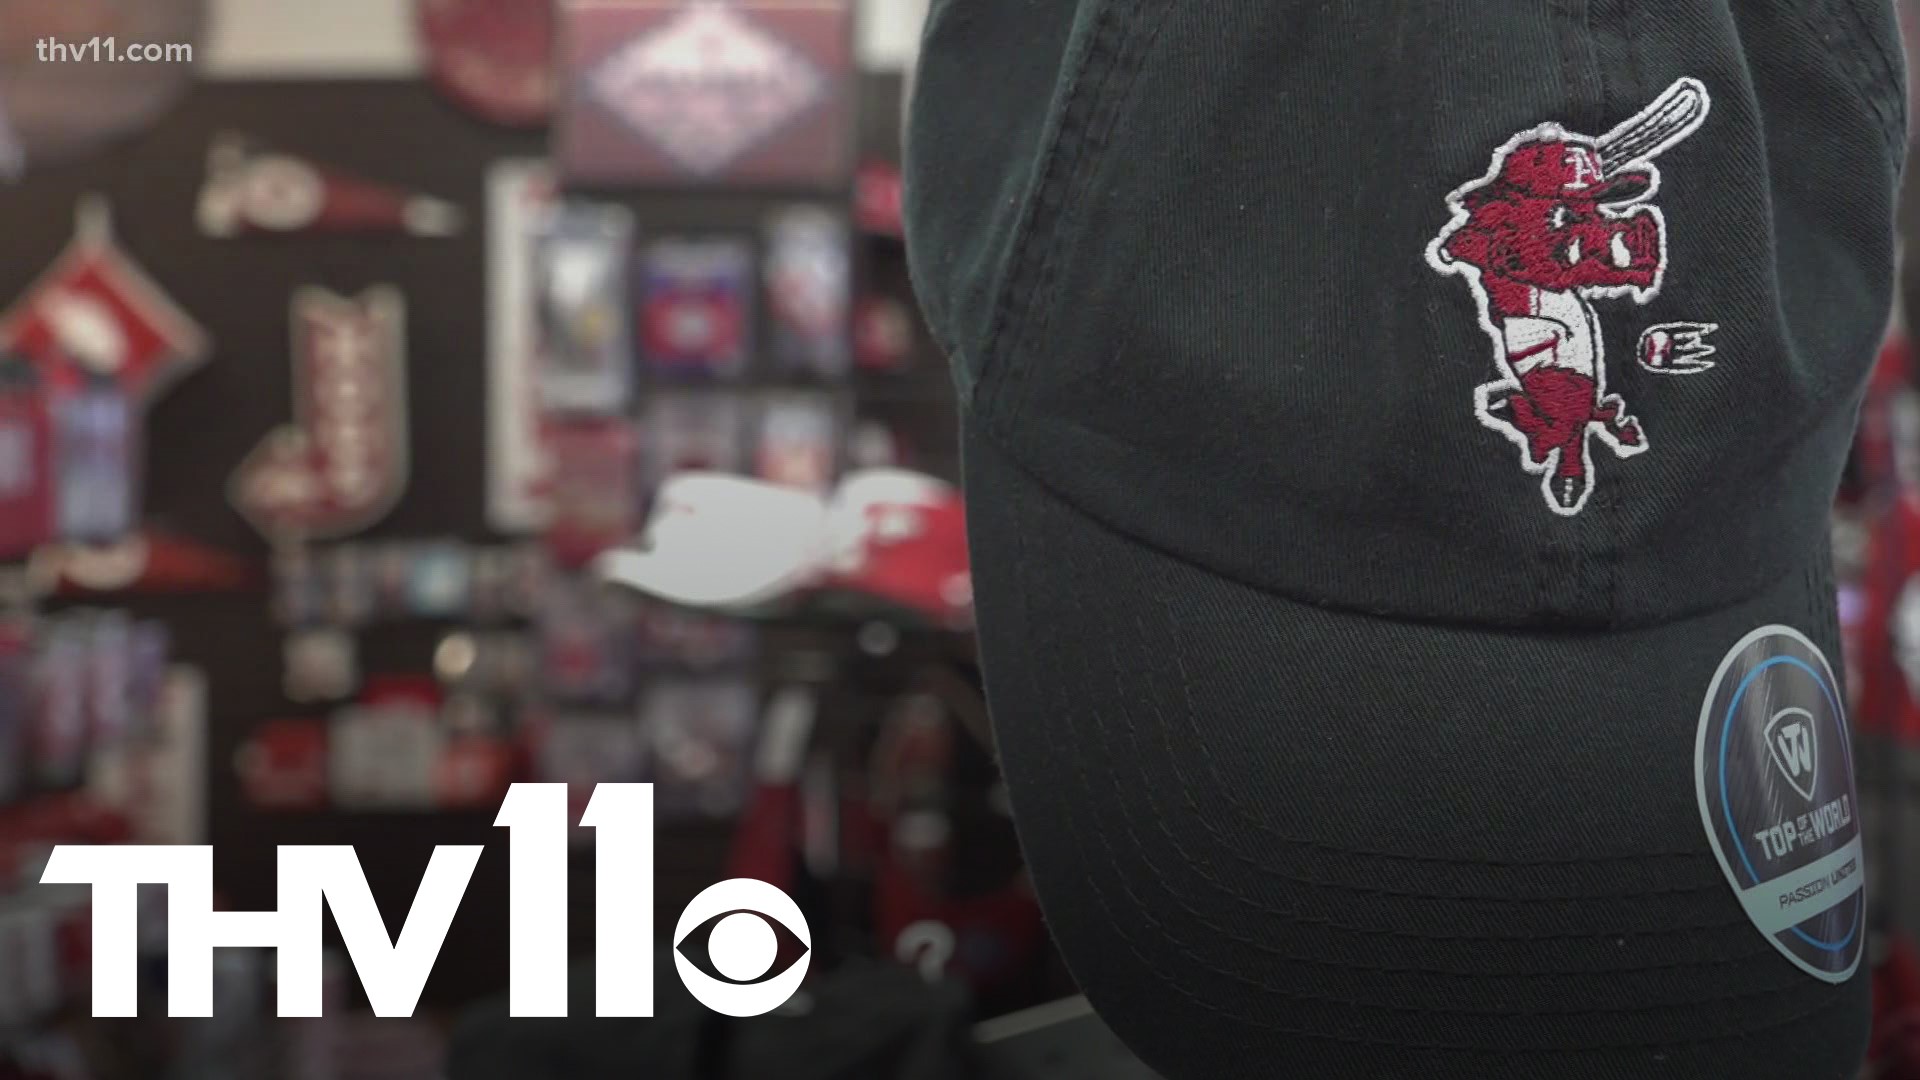 With Arkansas collegiate sports seeing success in recent months, stores focused on Razorback gear are seeing a boom in business, especially heading into this weekend